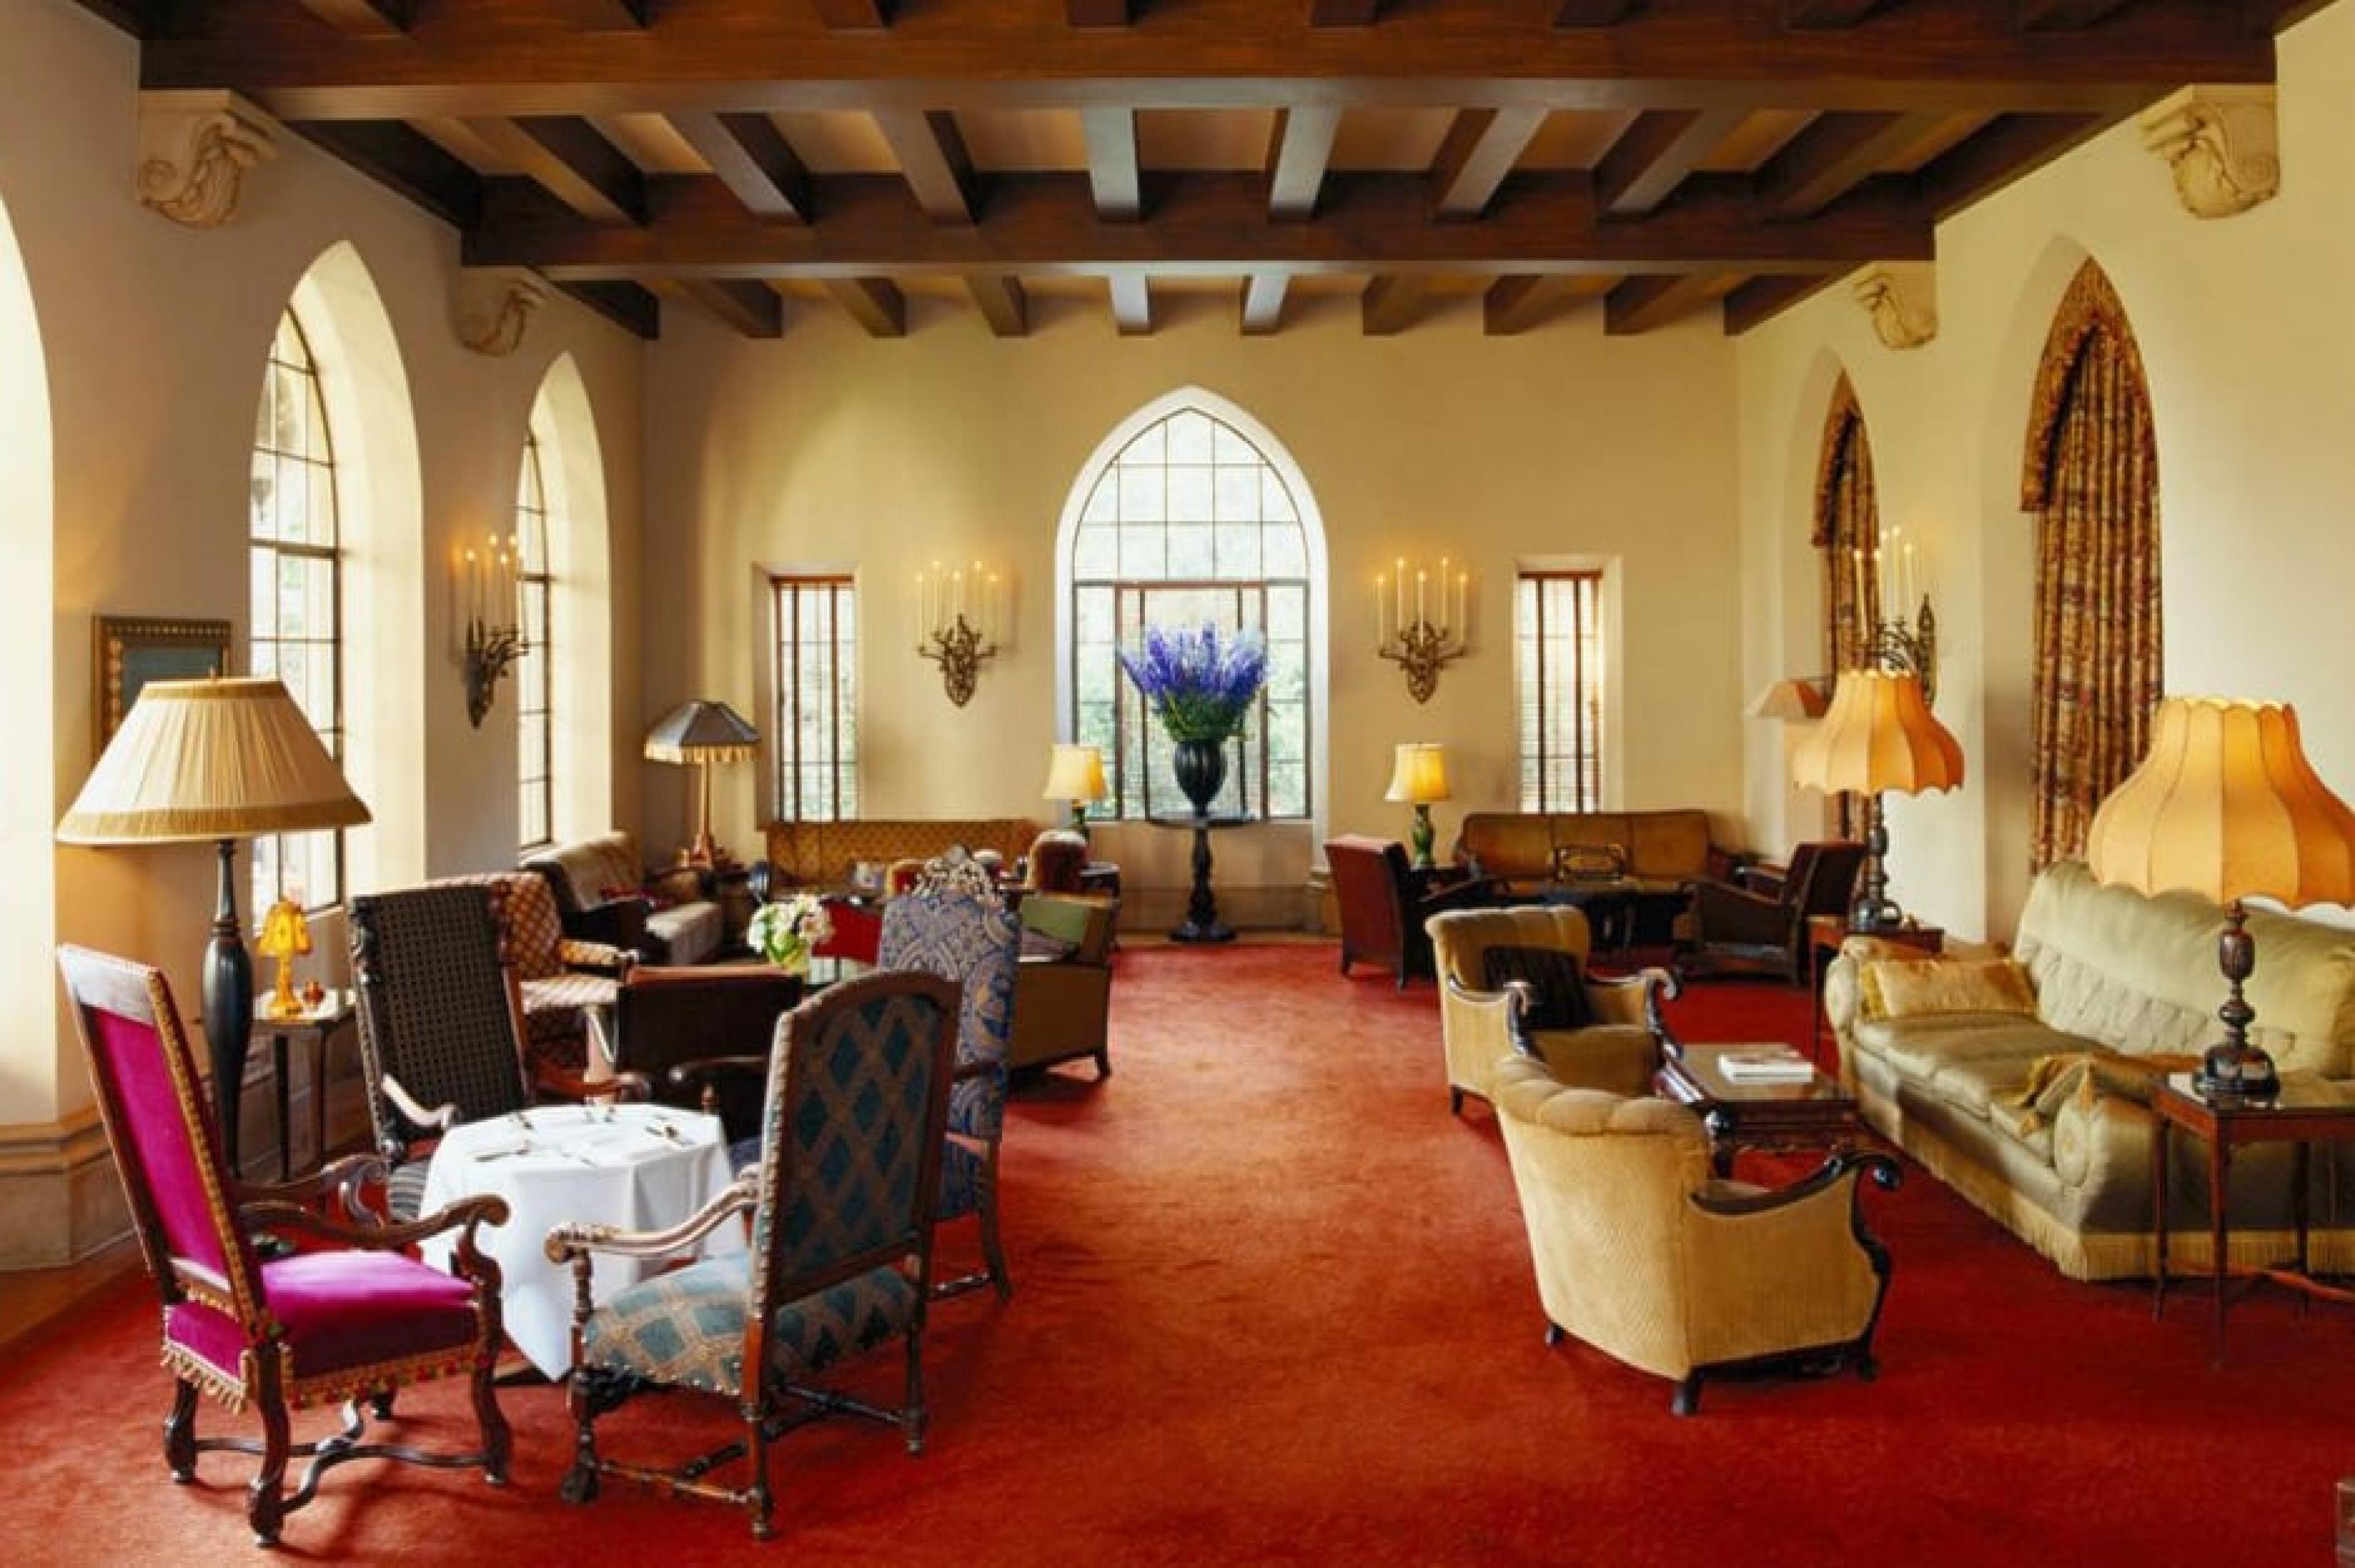 Lobby Lounge from Courtyard at Château La Chenevière, Normandy, France